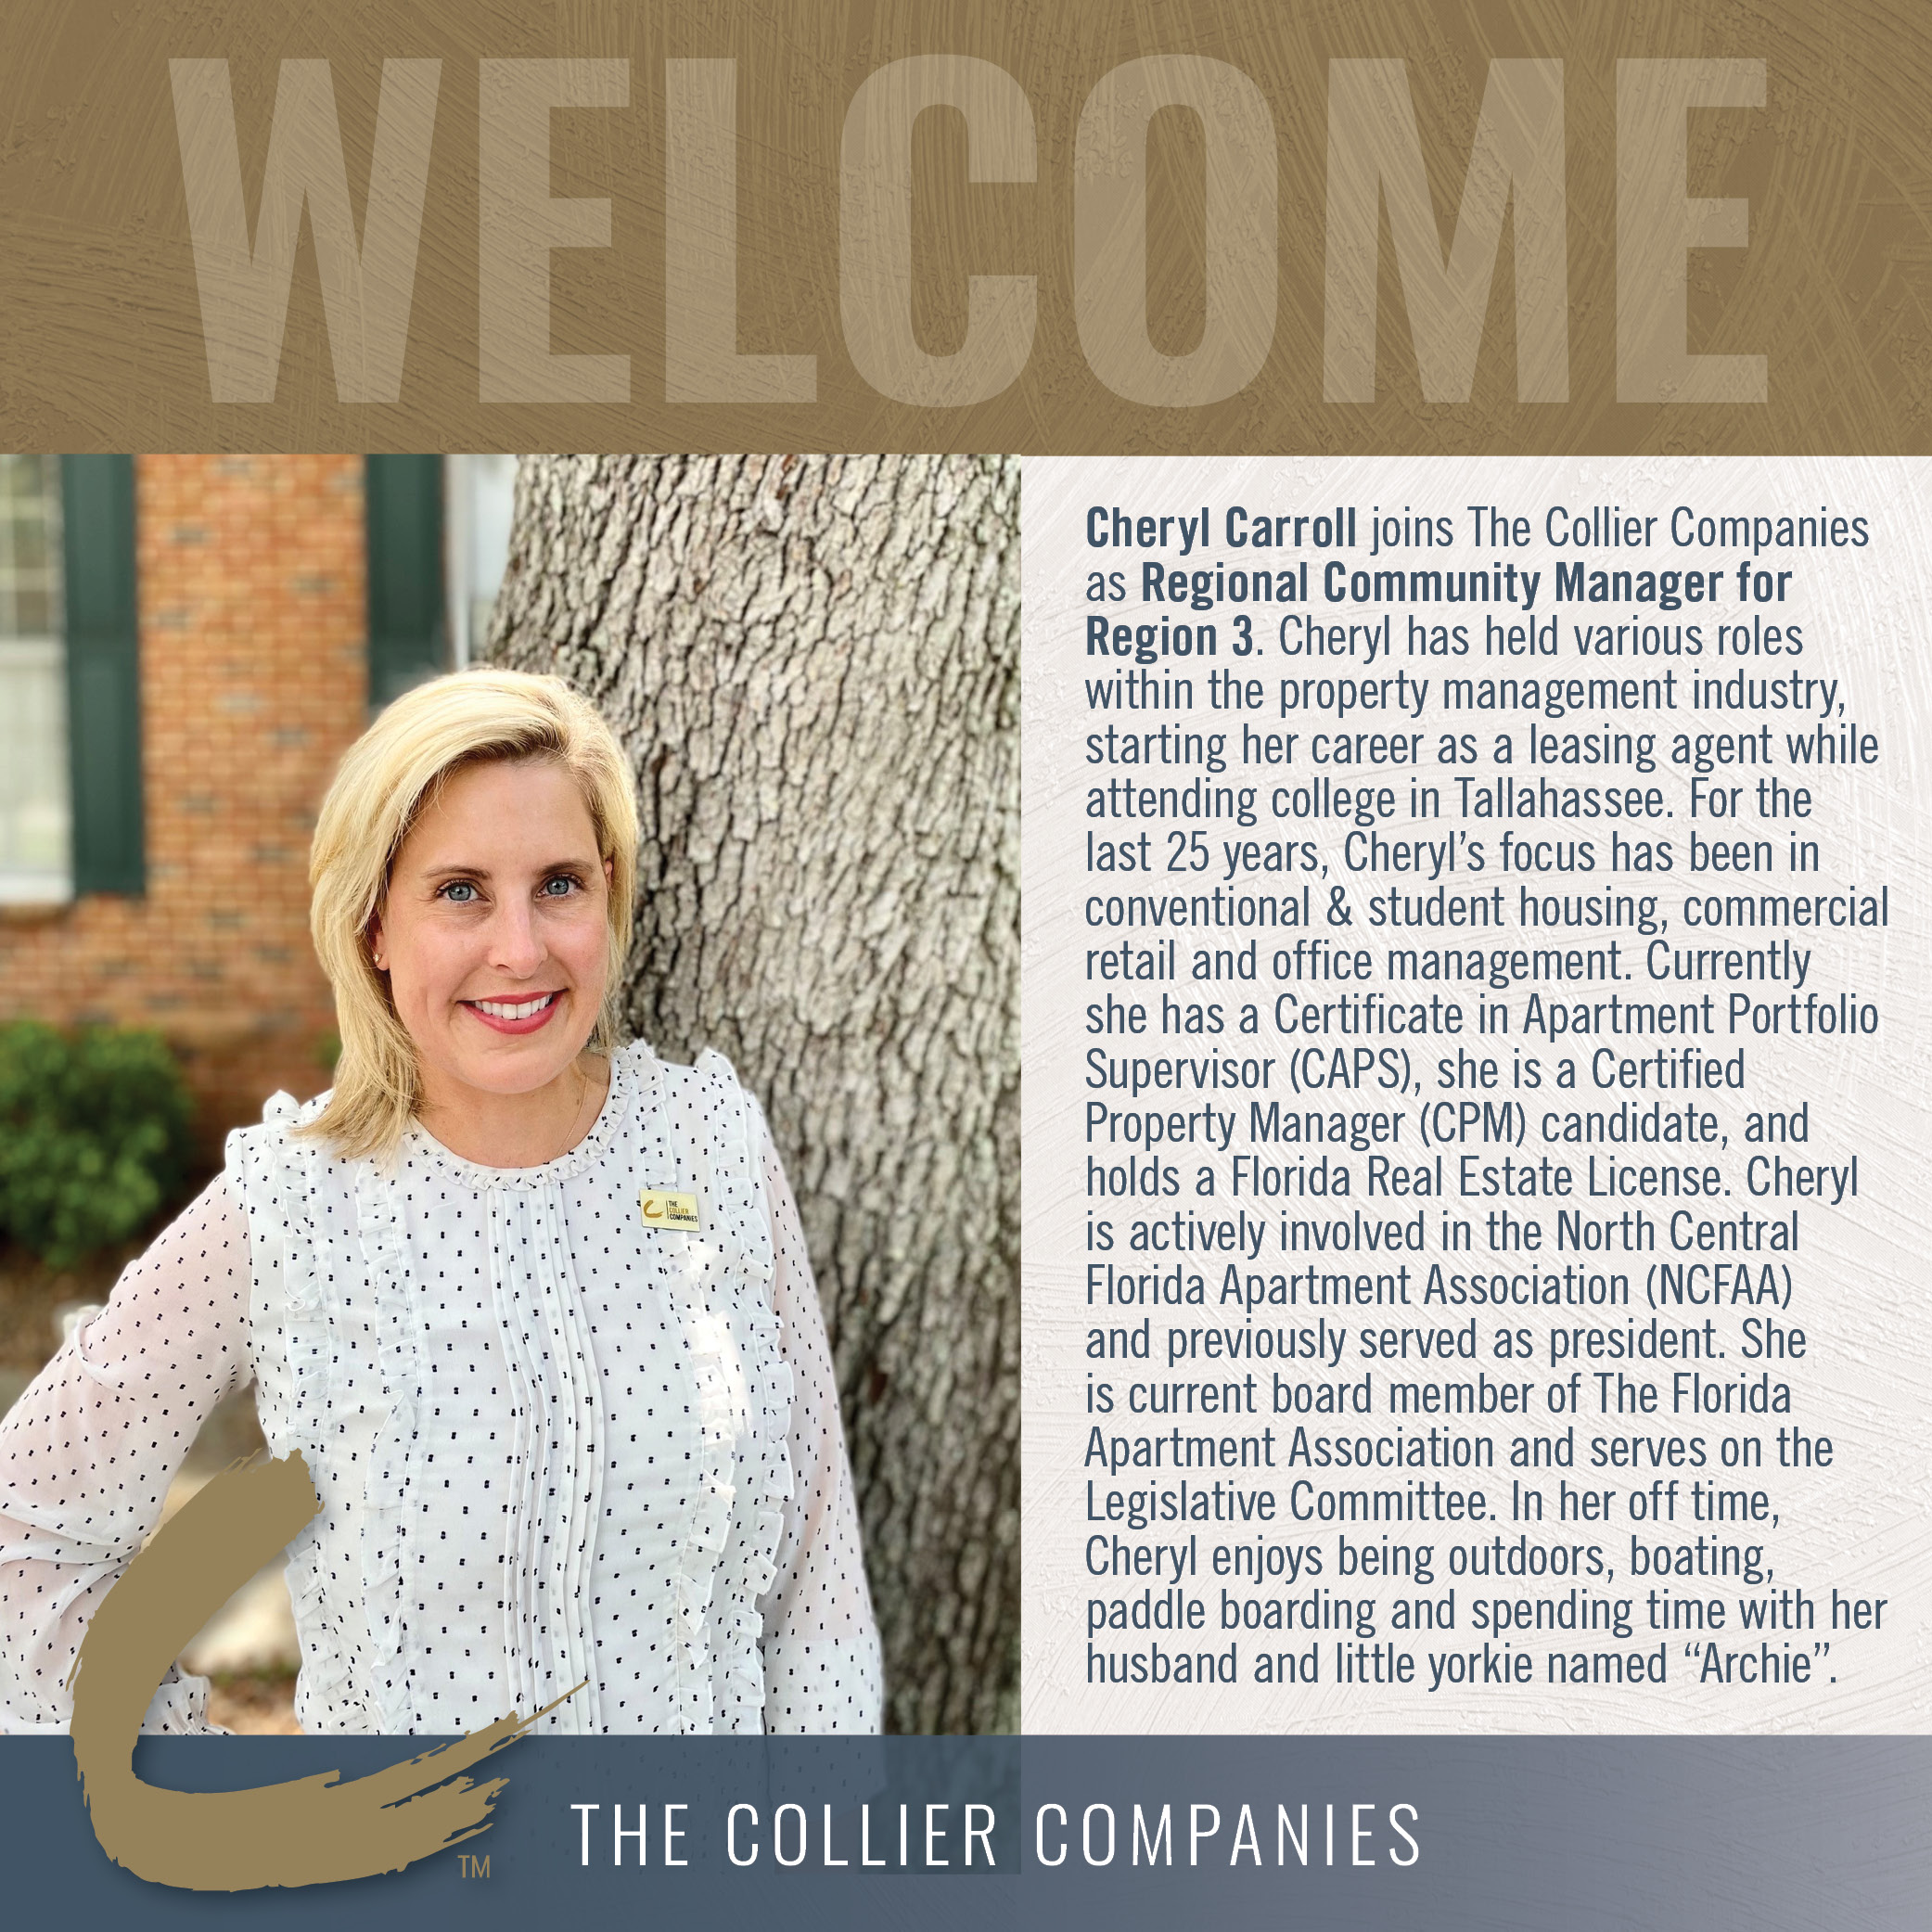 Welcome to The Collier Companies, Cheryl! - The Collier Companies